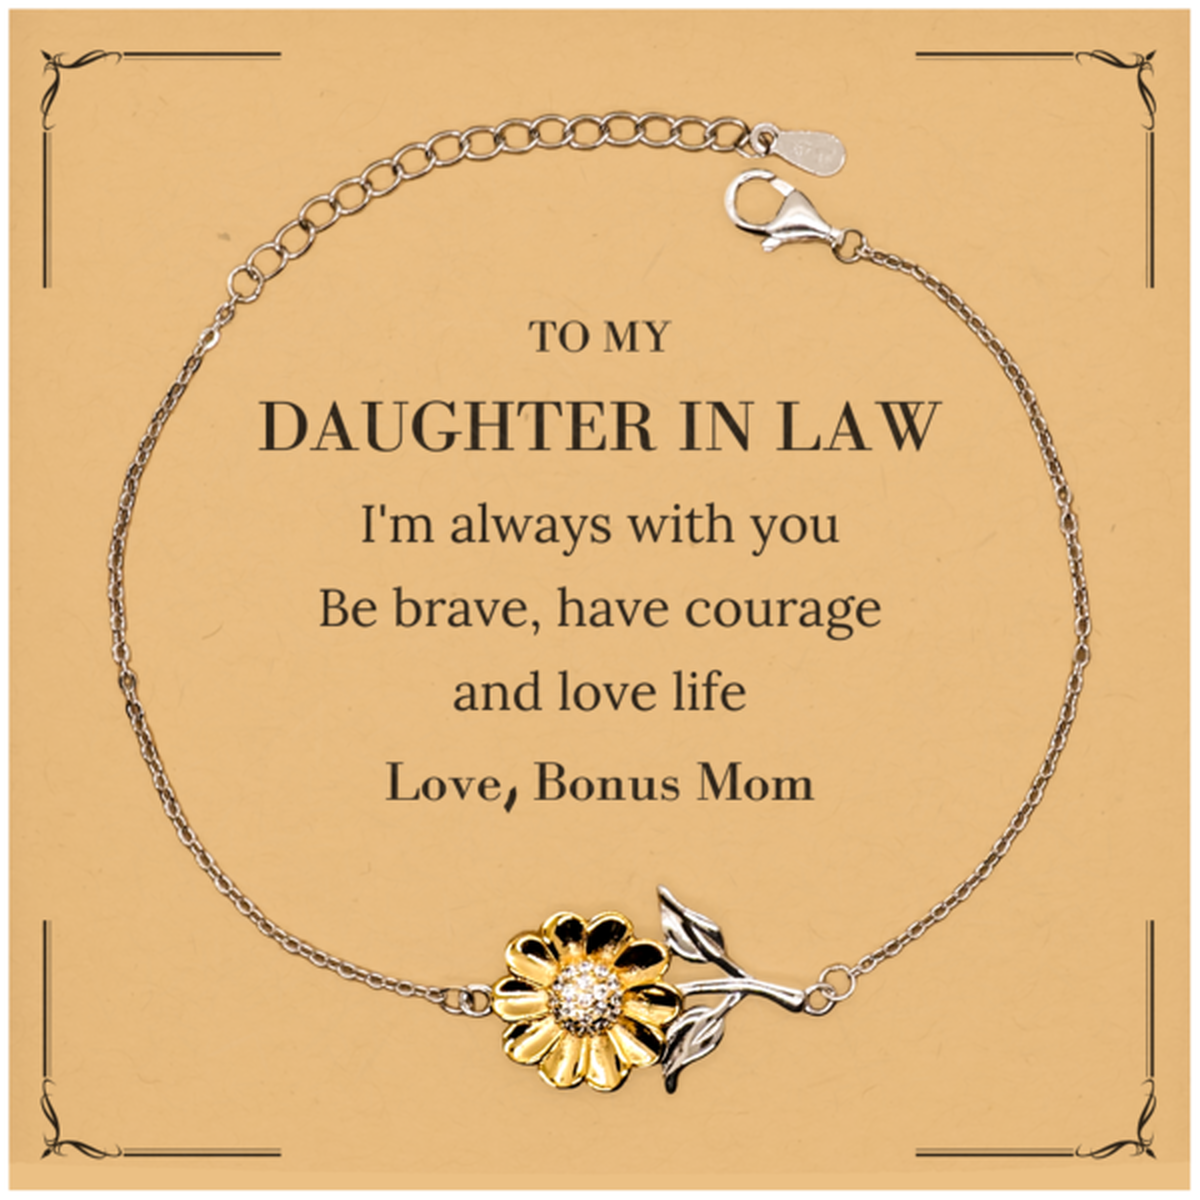 To My Daughter In Law Gifts from Bonus Mom, Unique Sunflower Bracelet Inspirational Christmas Birthday Graduation Gifts for Daughter In Law I'm always with you. Be brave, have courage and love life. Love, Bonus Mom